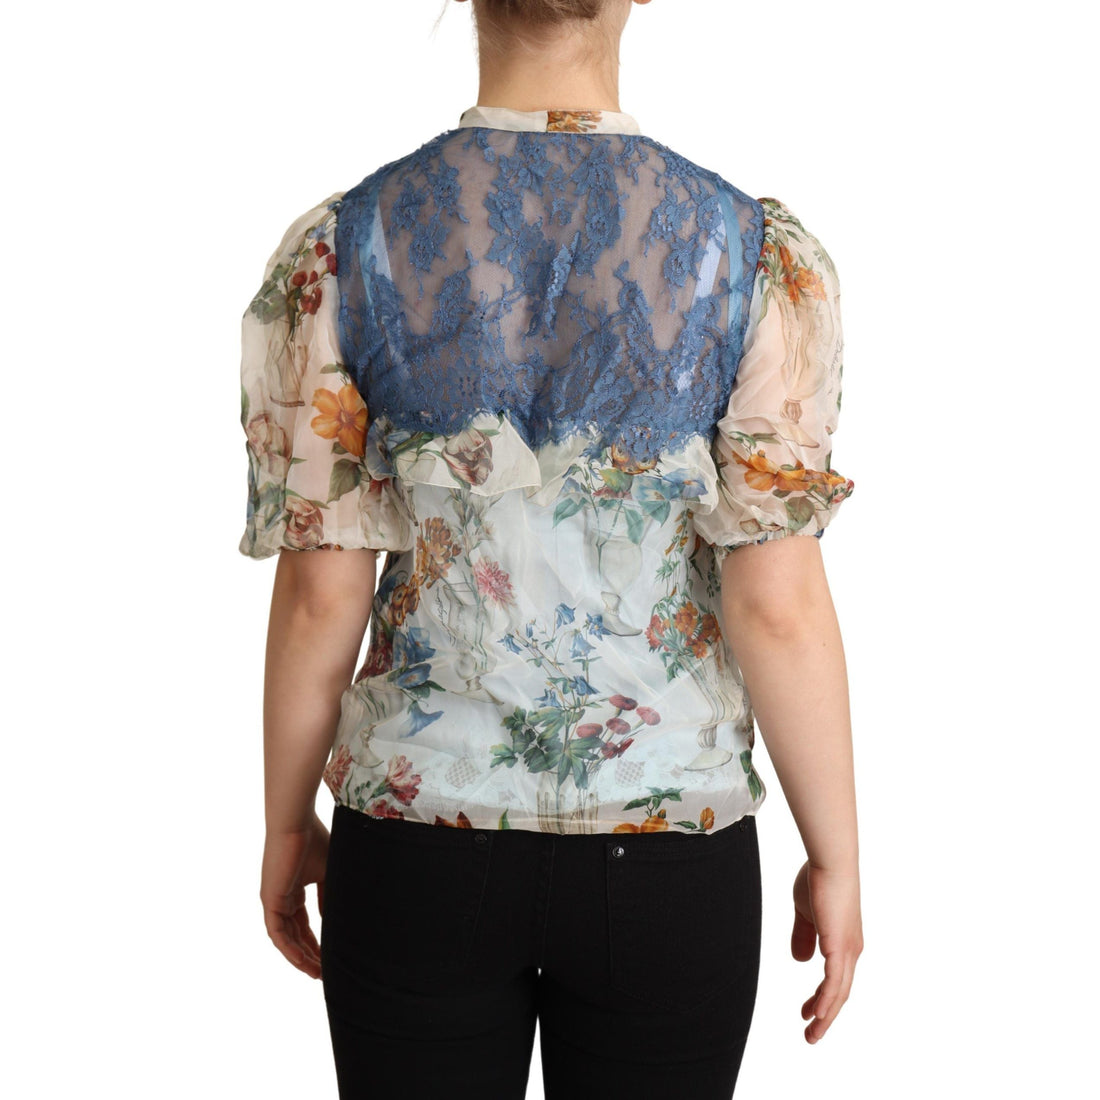 Dolce & Gabbana Chic Floral Silk Blouse with Ascot Collar